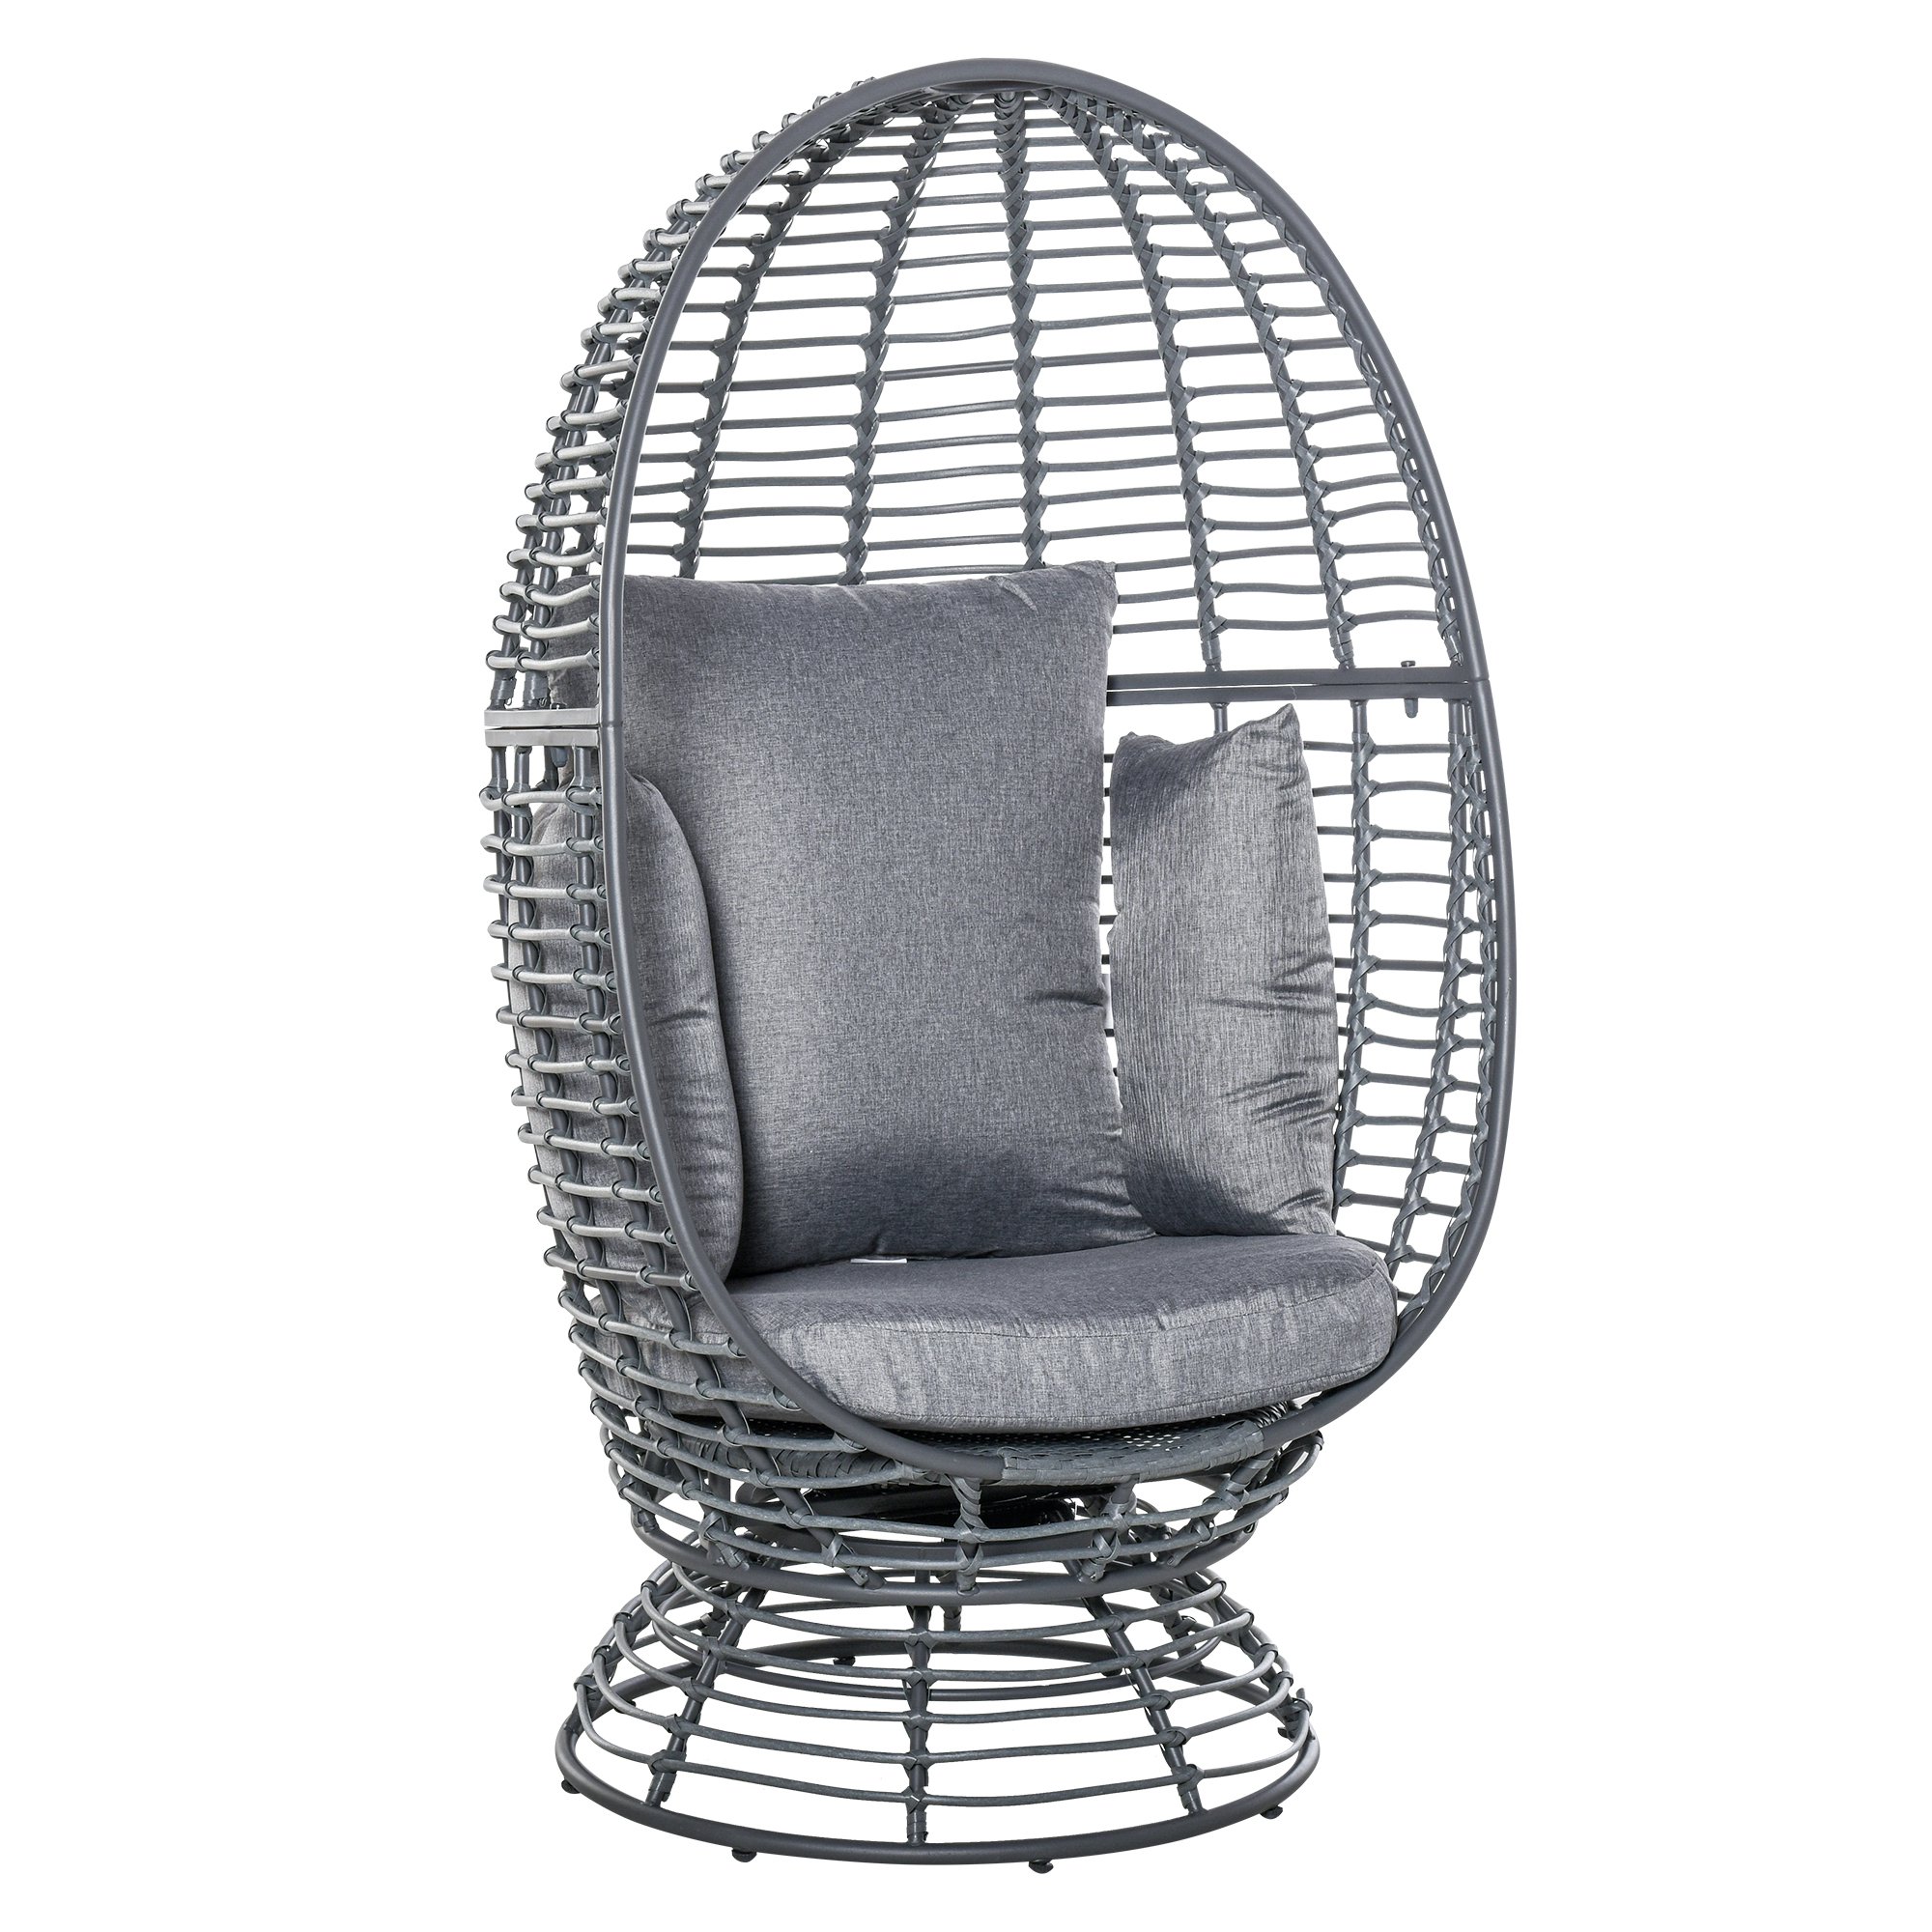 Outsunny Outdoor Egg Swivel Basket Chair with 360 Degrees Rotation, Soft Cushion & Weather-Fighting Design, Grey